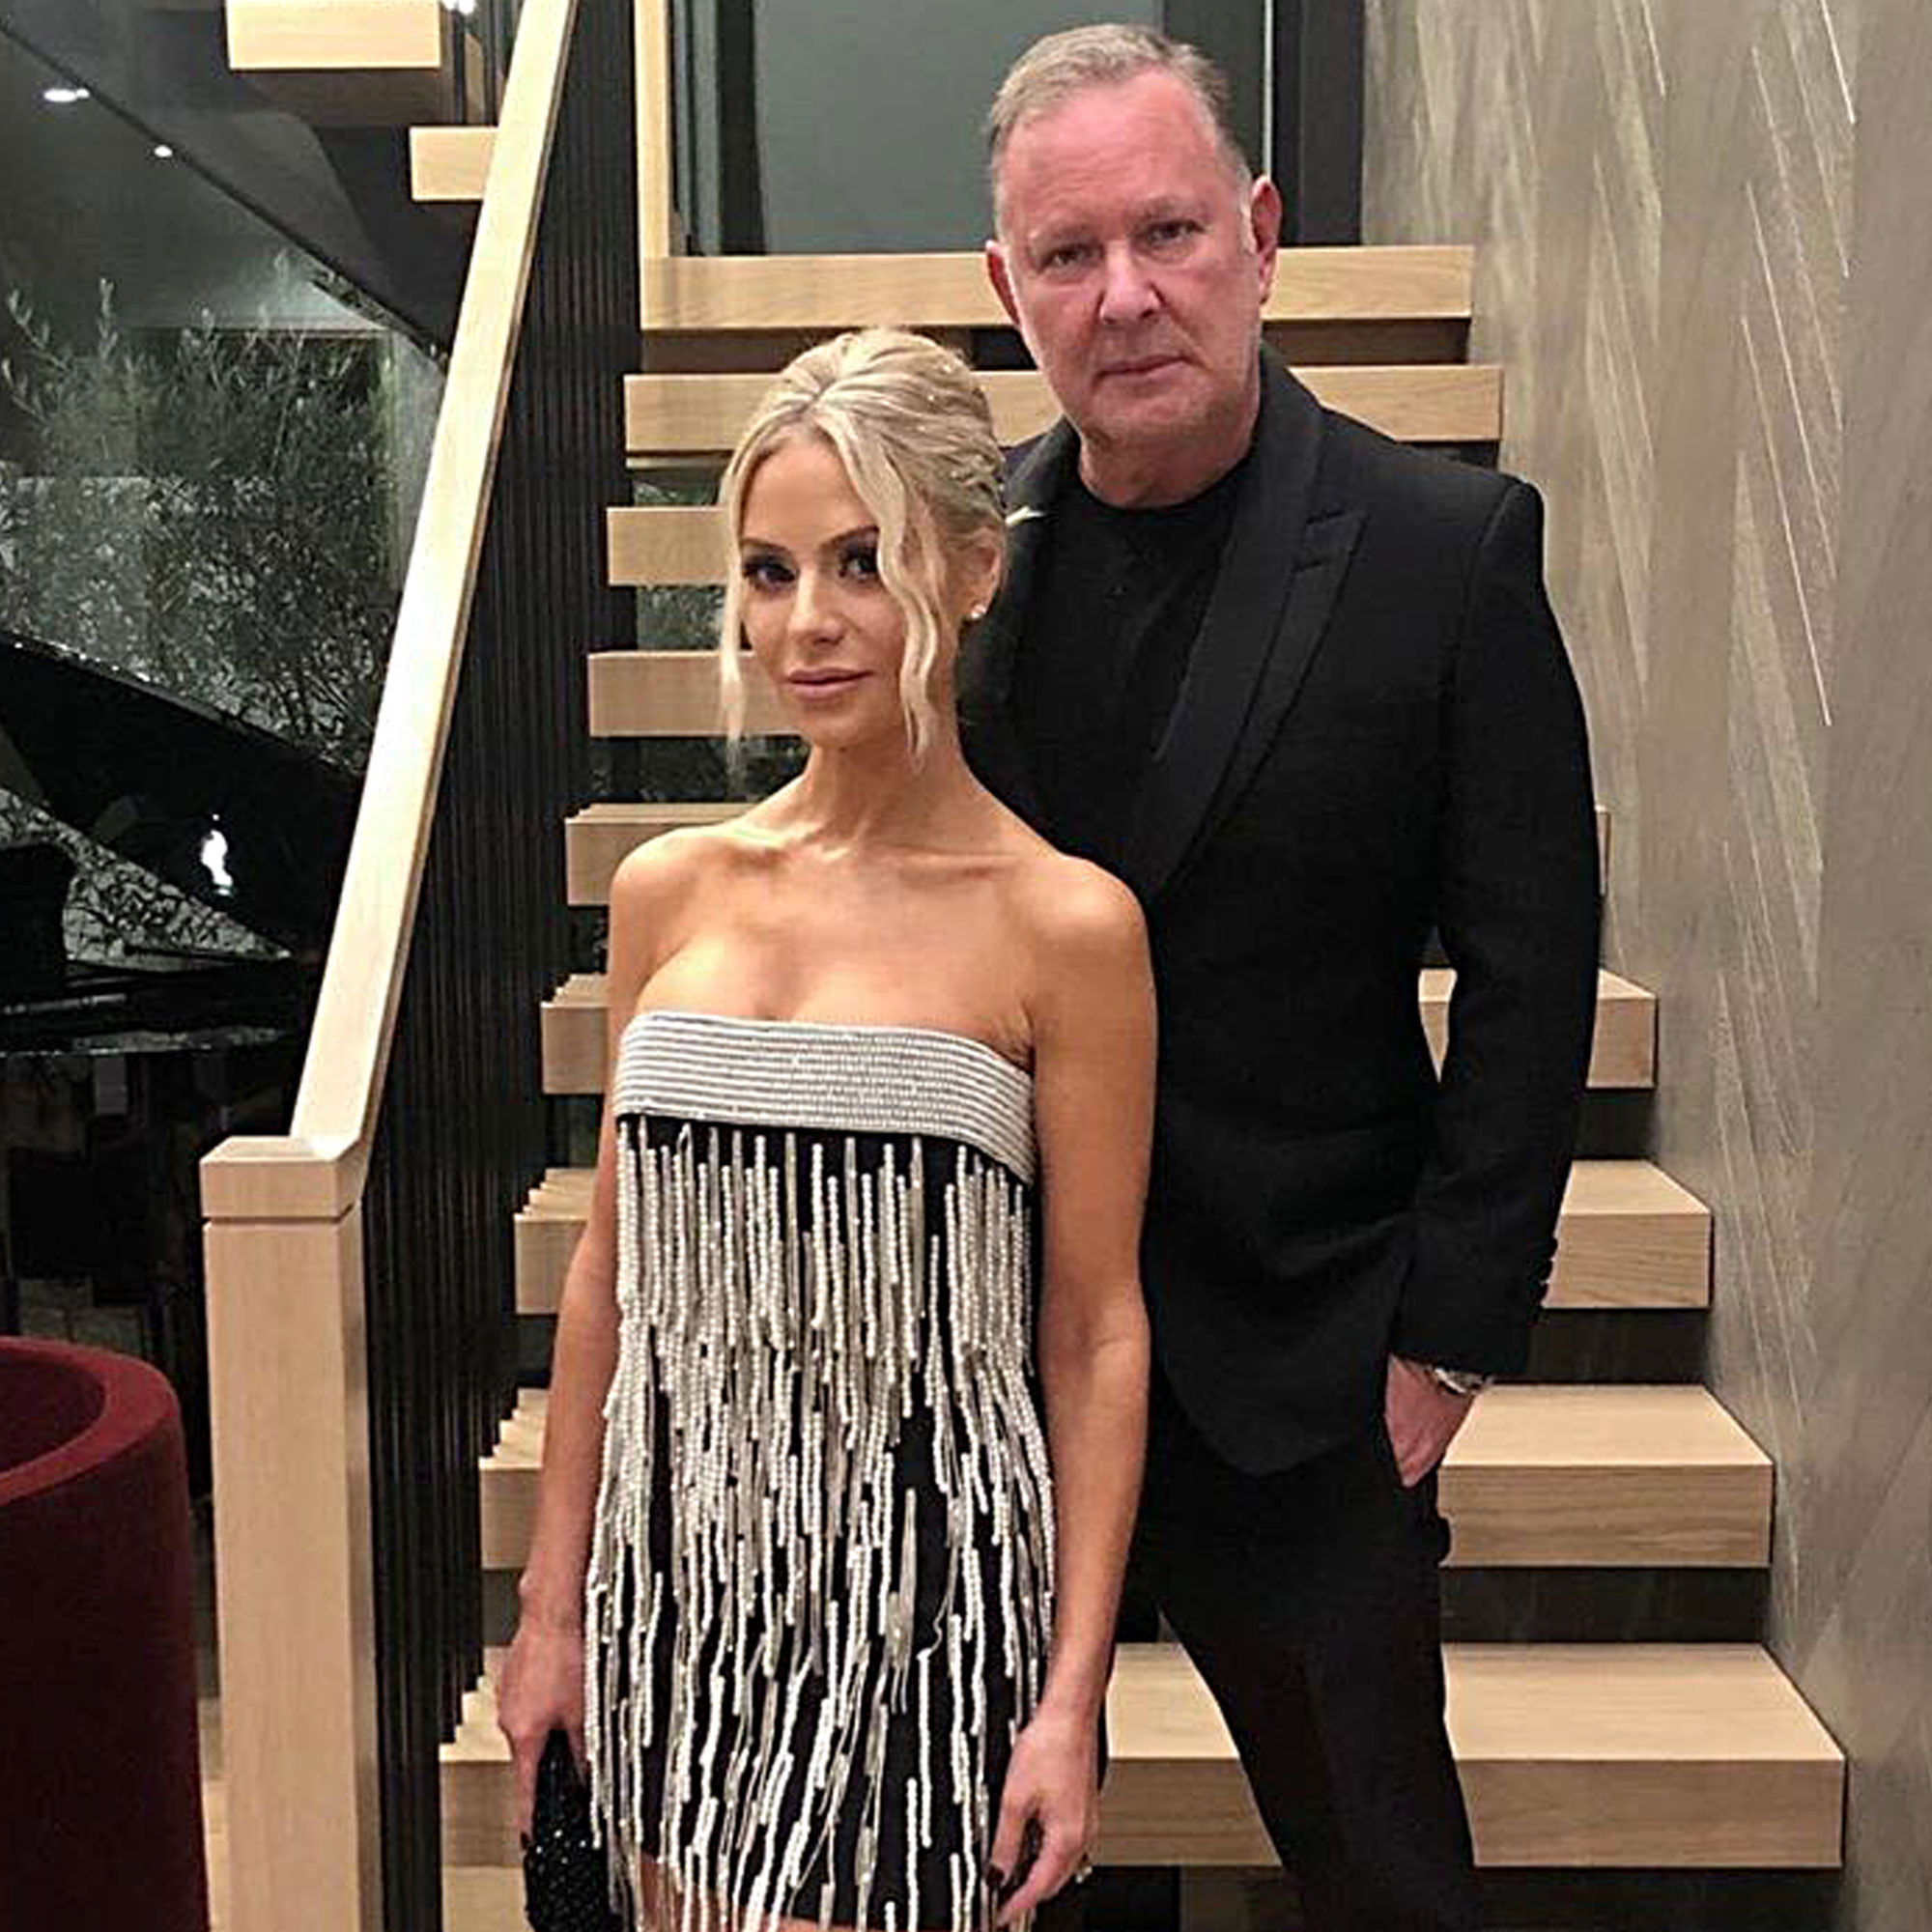 Dorit Kemsley The Real Housewives of Beverly Hills 11.03 June 2, 2021 –  Star Style